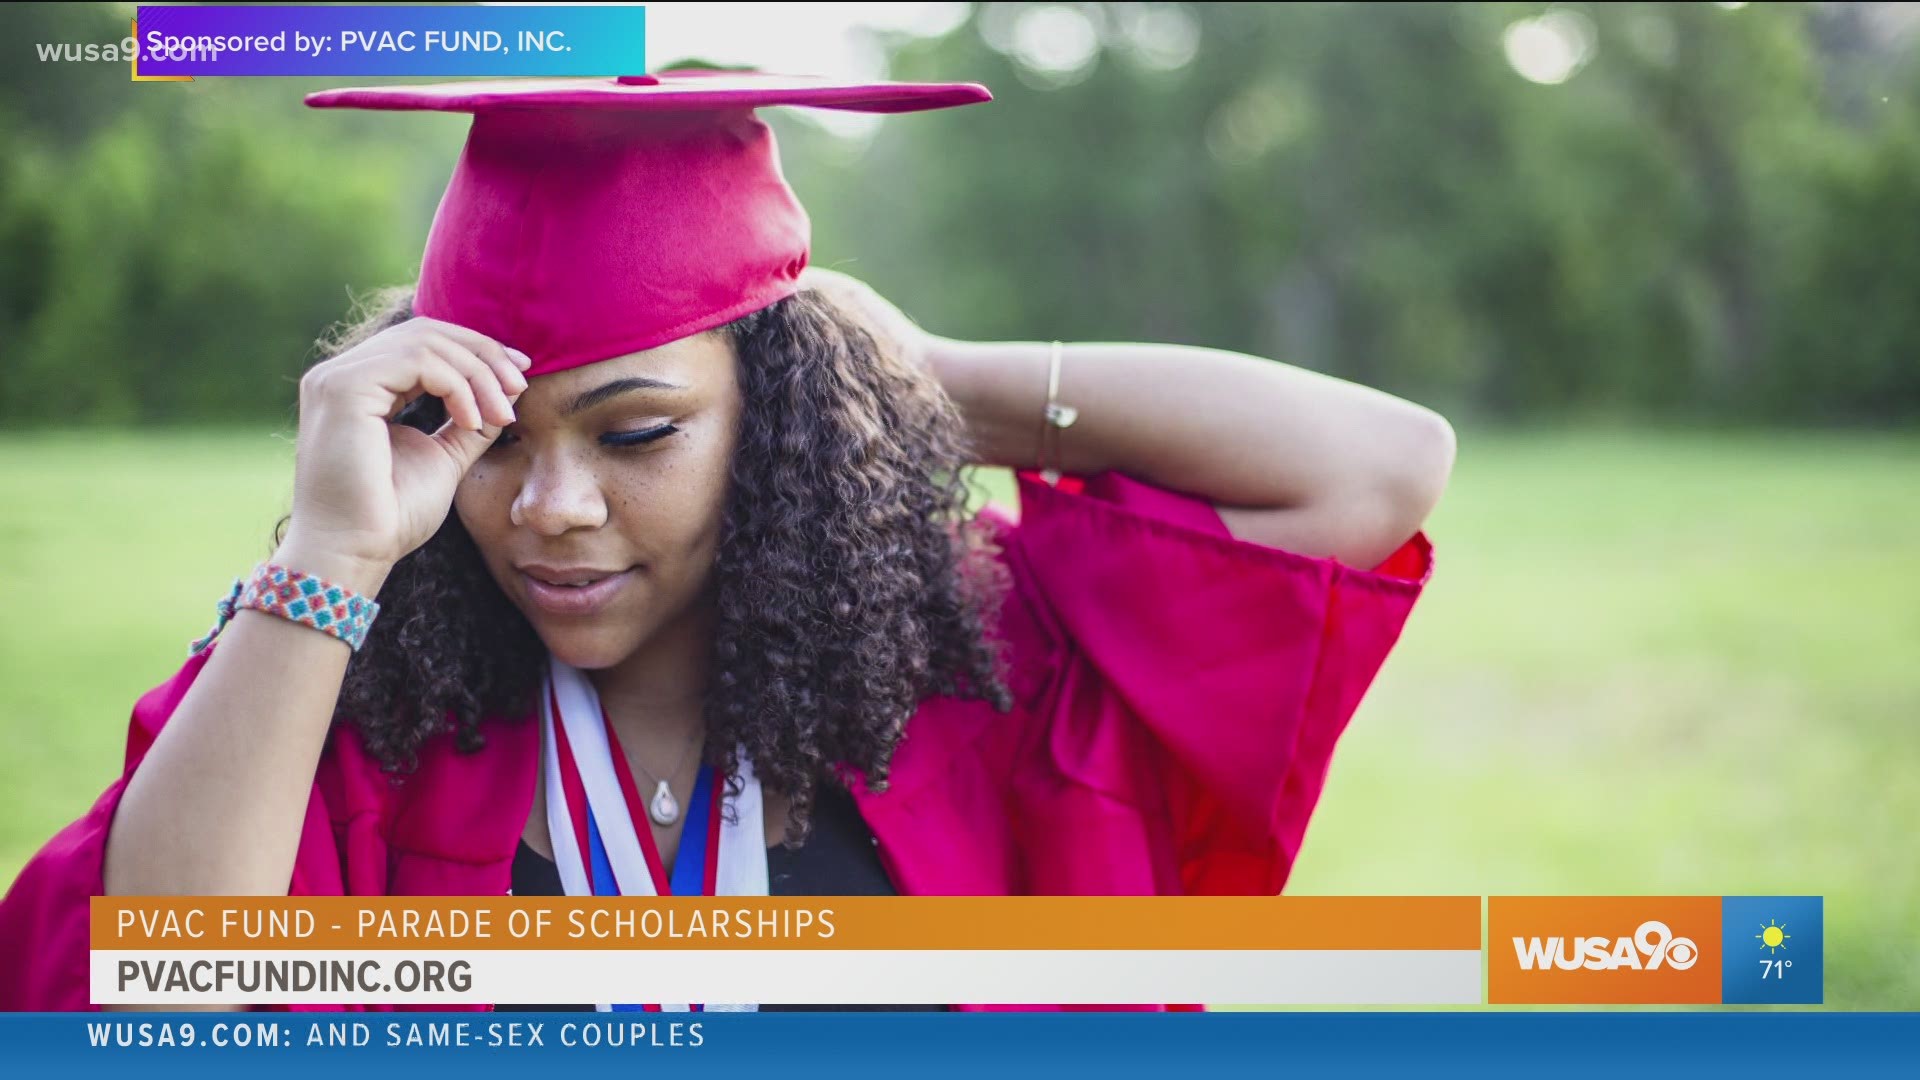 Sponsored by: PVAC Fund, INC. Dr. Christi Hay of the PVAC Fund and Ann Everett of LINKS tell us about the Parade of Scholarships this weekend. Watch on WUSA9.